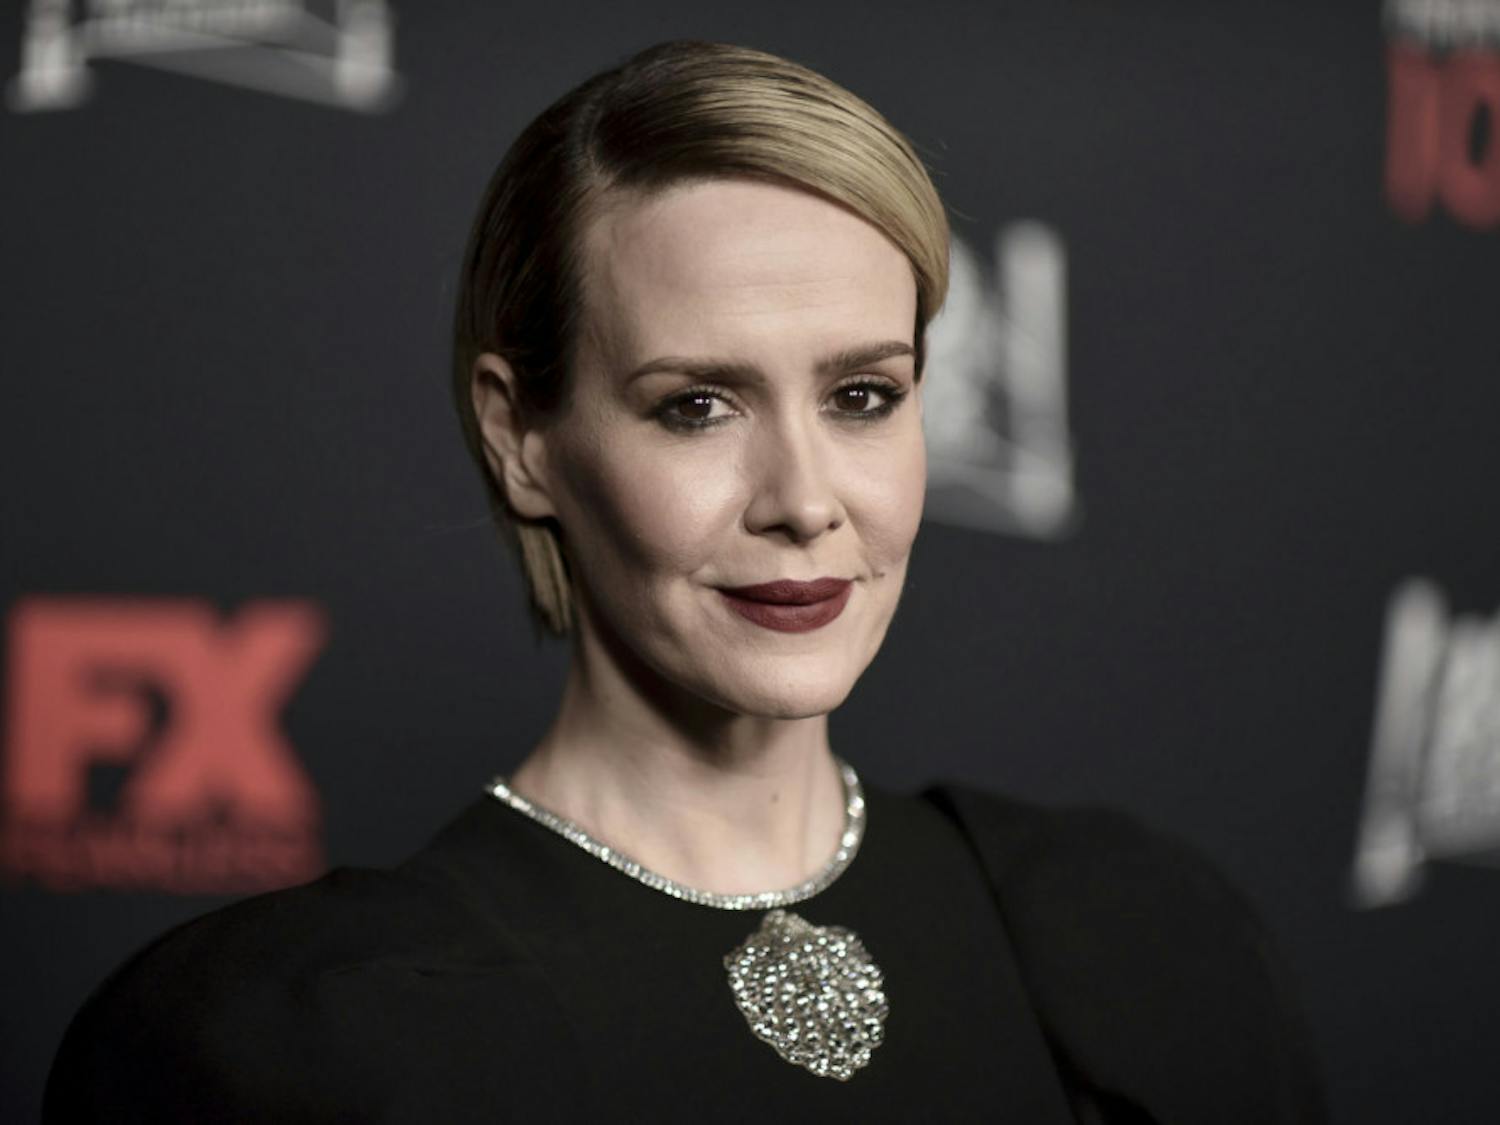 Sarah Paulson attends the 100 Episodes of "American Horror Story" Celebration at Hollywood Forever Cemetery on Saturday, Oct. 26, 2019, in Los Angeles. (Photo by Richard Shotwell/Invision/AP)